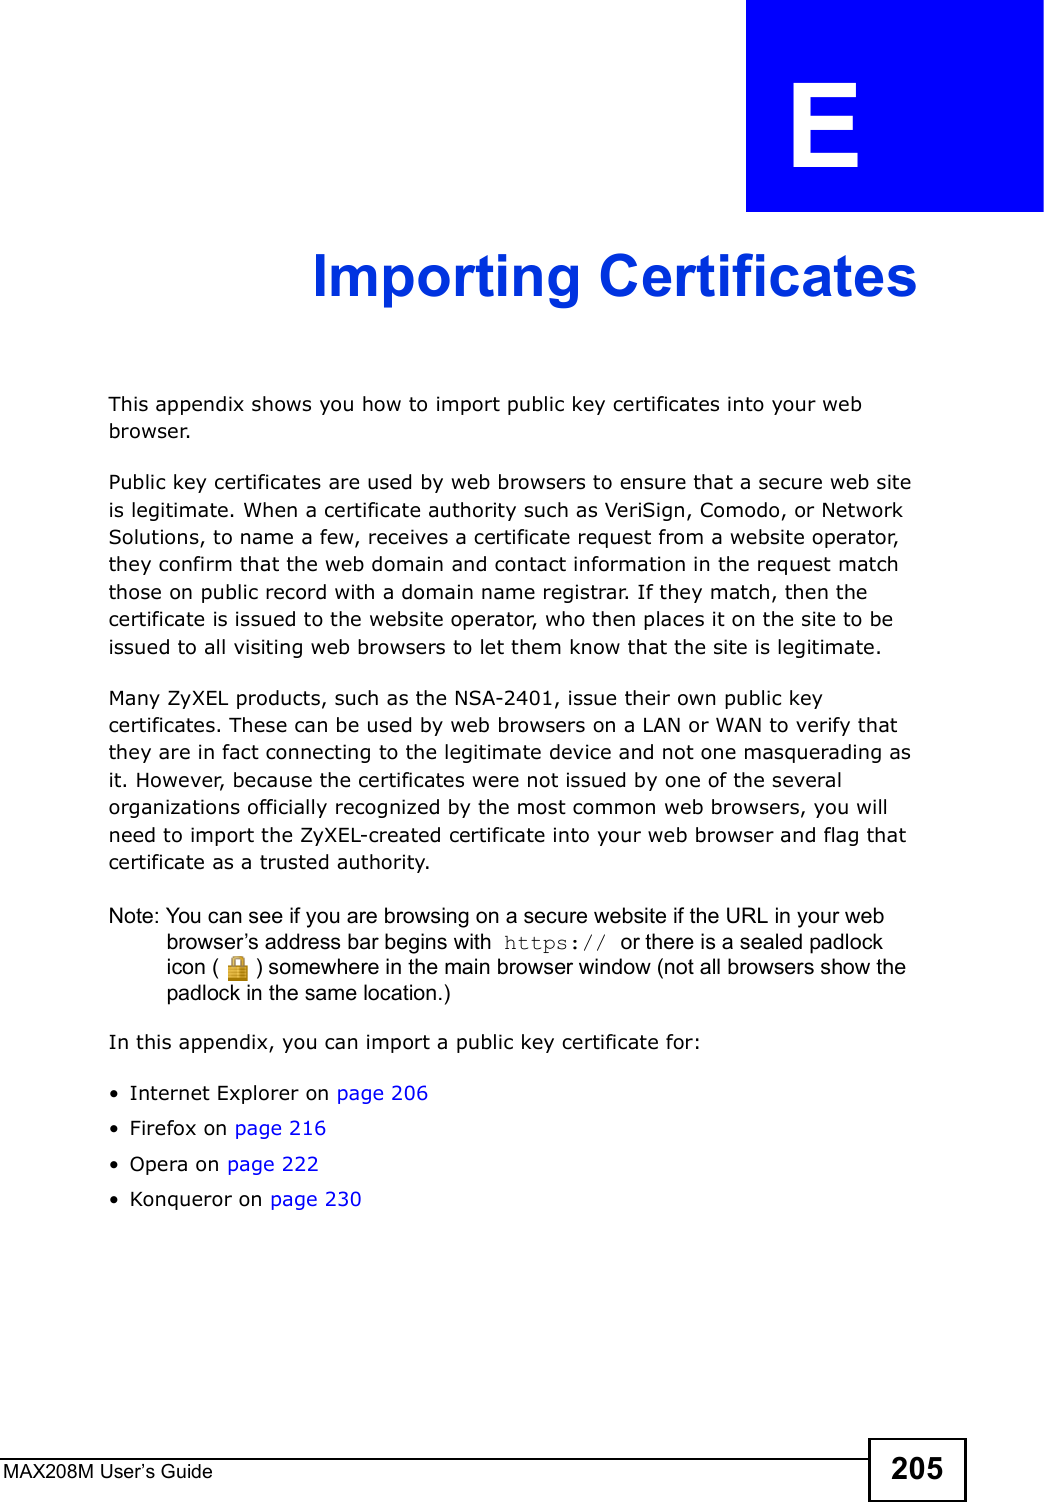 MAX208M User s Guide 205APPENDIX  E Importing CertificatesThis appendix shows you how to import public key certificates into your web browser. Public key certificates are used by web browsers to ensure that a secure web site is legitimate. When a certificate authority such as VeriSign, Comodo, or Network Solutions, to name a few, receives a certificate request from a website operator, they confirm that the web domain and contact information in the request match those on public record with a domain name registrar. If they match, then the certificate is issued to the website operator, who then places it on the site to be issued to all visiting web browsers to let them know that the site is legitimate.Many ZyXEL products, such as the NSA-2401, issue their own public key certificates. These can be used by web browsers on a LAN or WAN to verify that they are in fact connecting to the legitimate device and not one masquerading as it. However, because the certificates were not issued by one of the several organizations officially recognized by the most common web browsers, you will need to import the ZyXEL-created certificate into your web browser and flag that certificate as a trusted authority.Note: You can see if you are browsing on a secure website if the URL in your web browser s address bar begins with  https:// or there is a sealed padlock icon () somewhere in the main browser window (not all browsers show the padlock in the same location.)In this appendix, you can import a public key certificate for:!Internet Explorer on page 206!Firefox on page 216!Opera on page 222!Konqueror on page 230